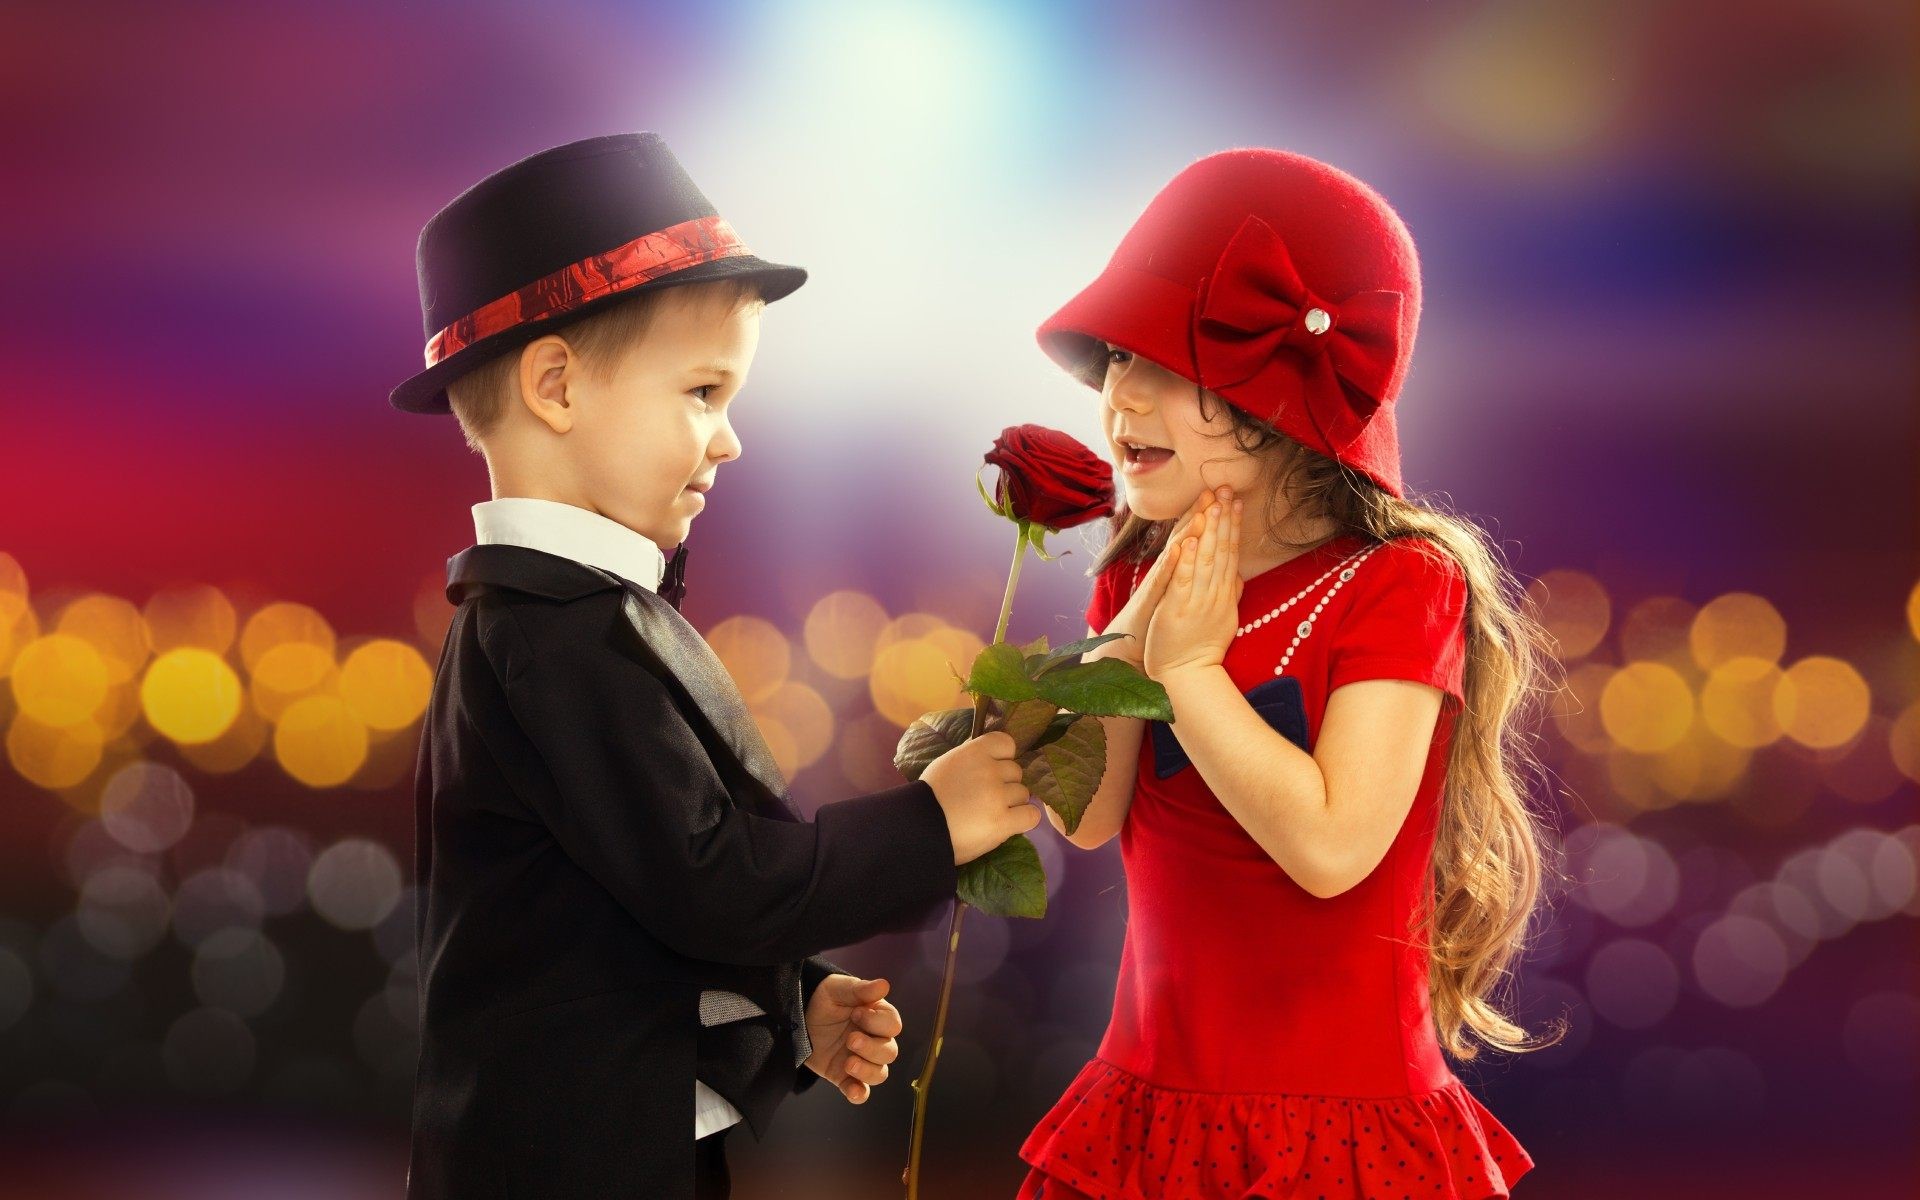 1920x1200 ... Love Romantic Boys And Girls Wallpapers And Pictures (2014 ...